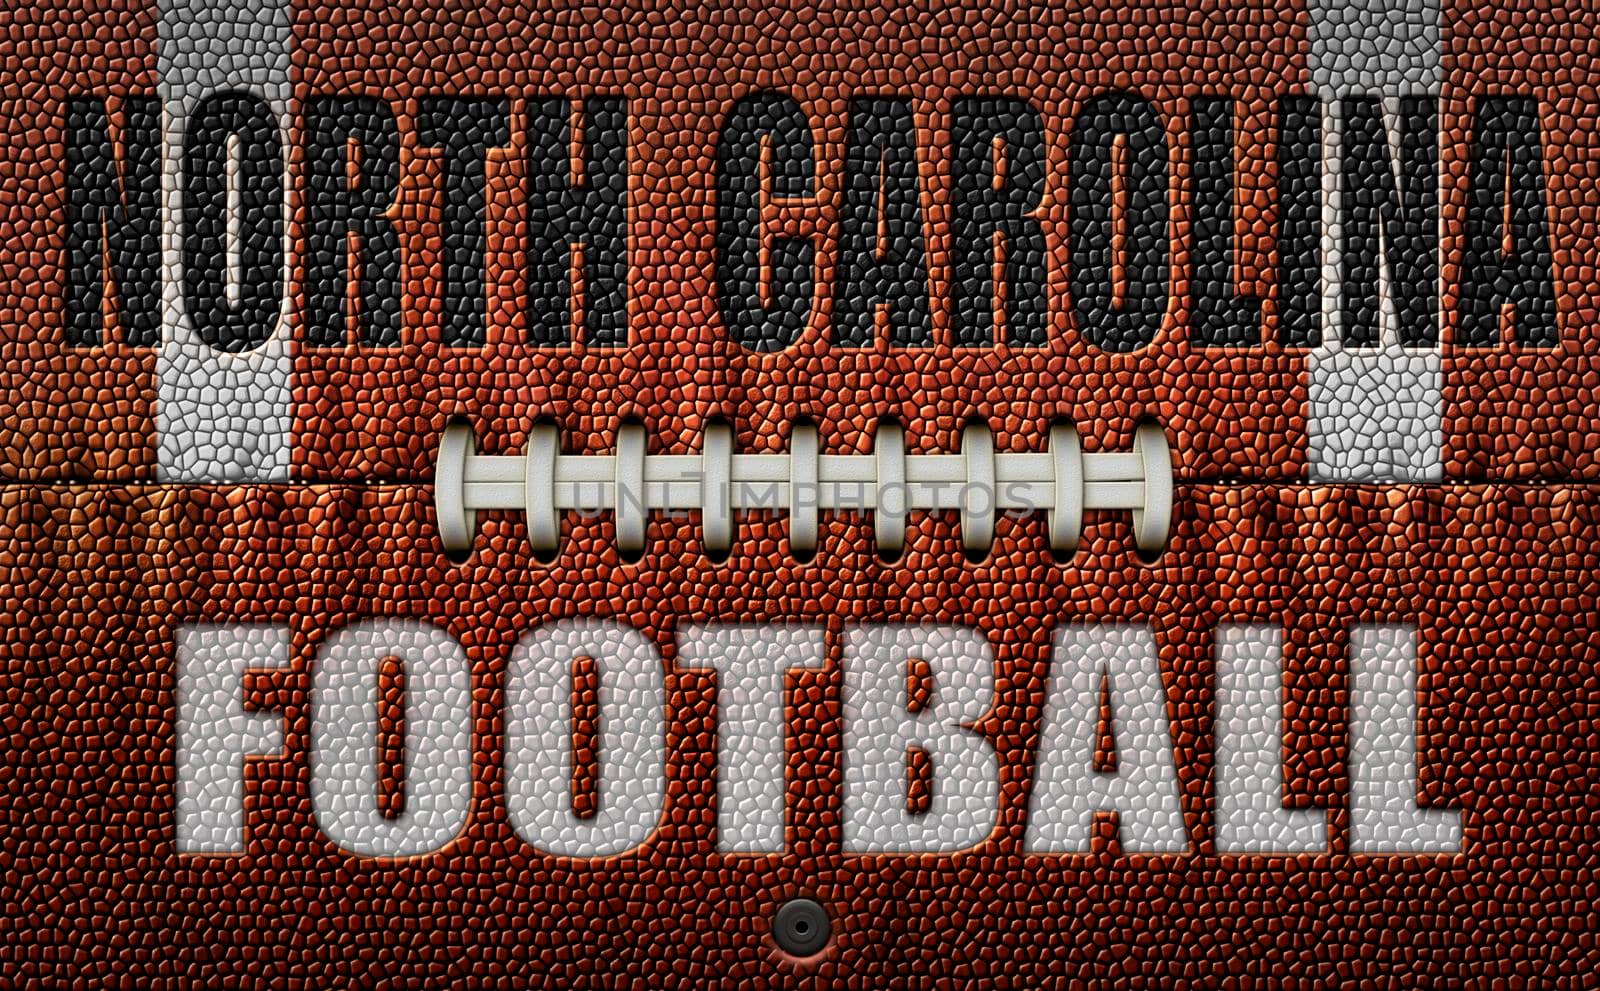 The words, North Carolina Football, embossed onto a football flattened into two dimensions. 3D Illustration